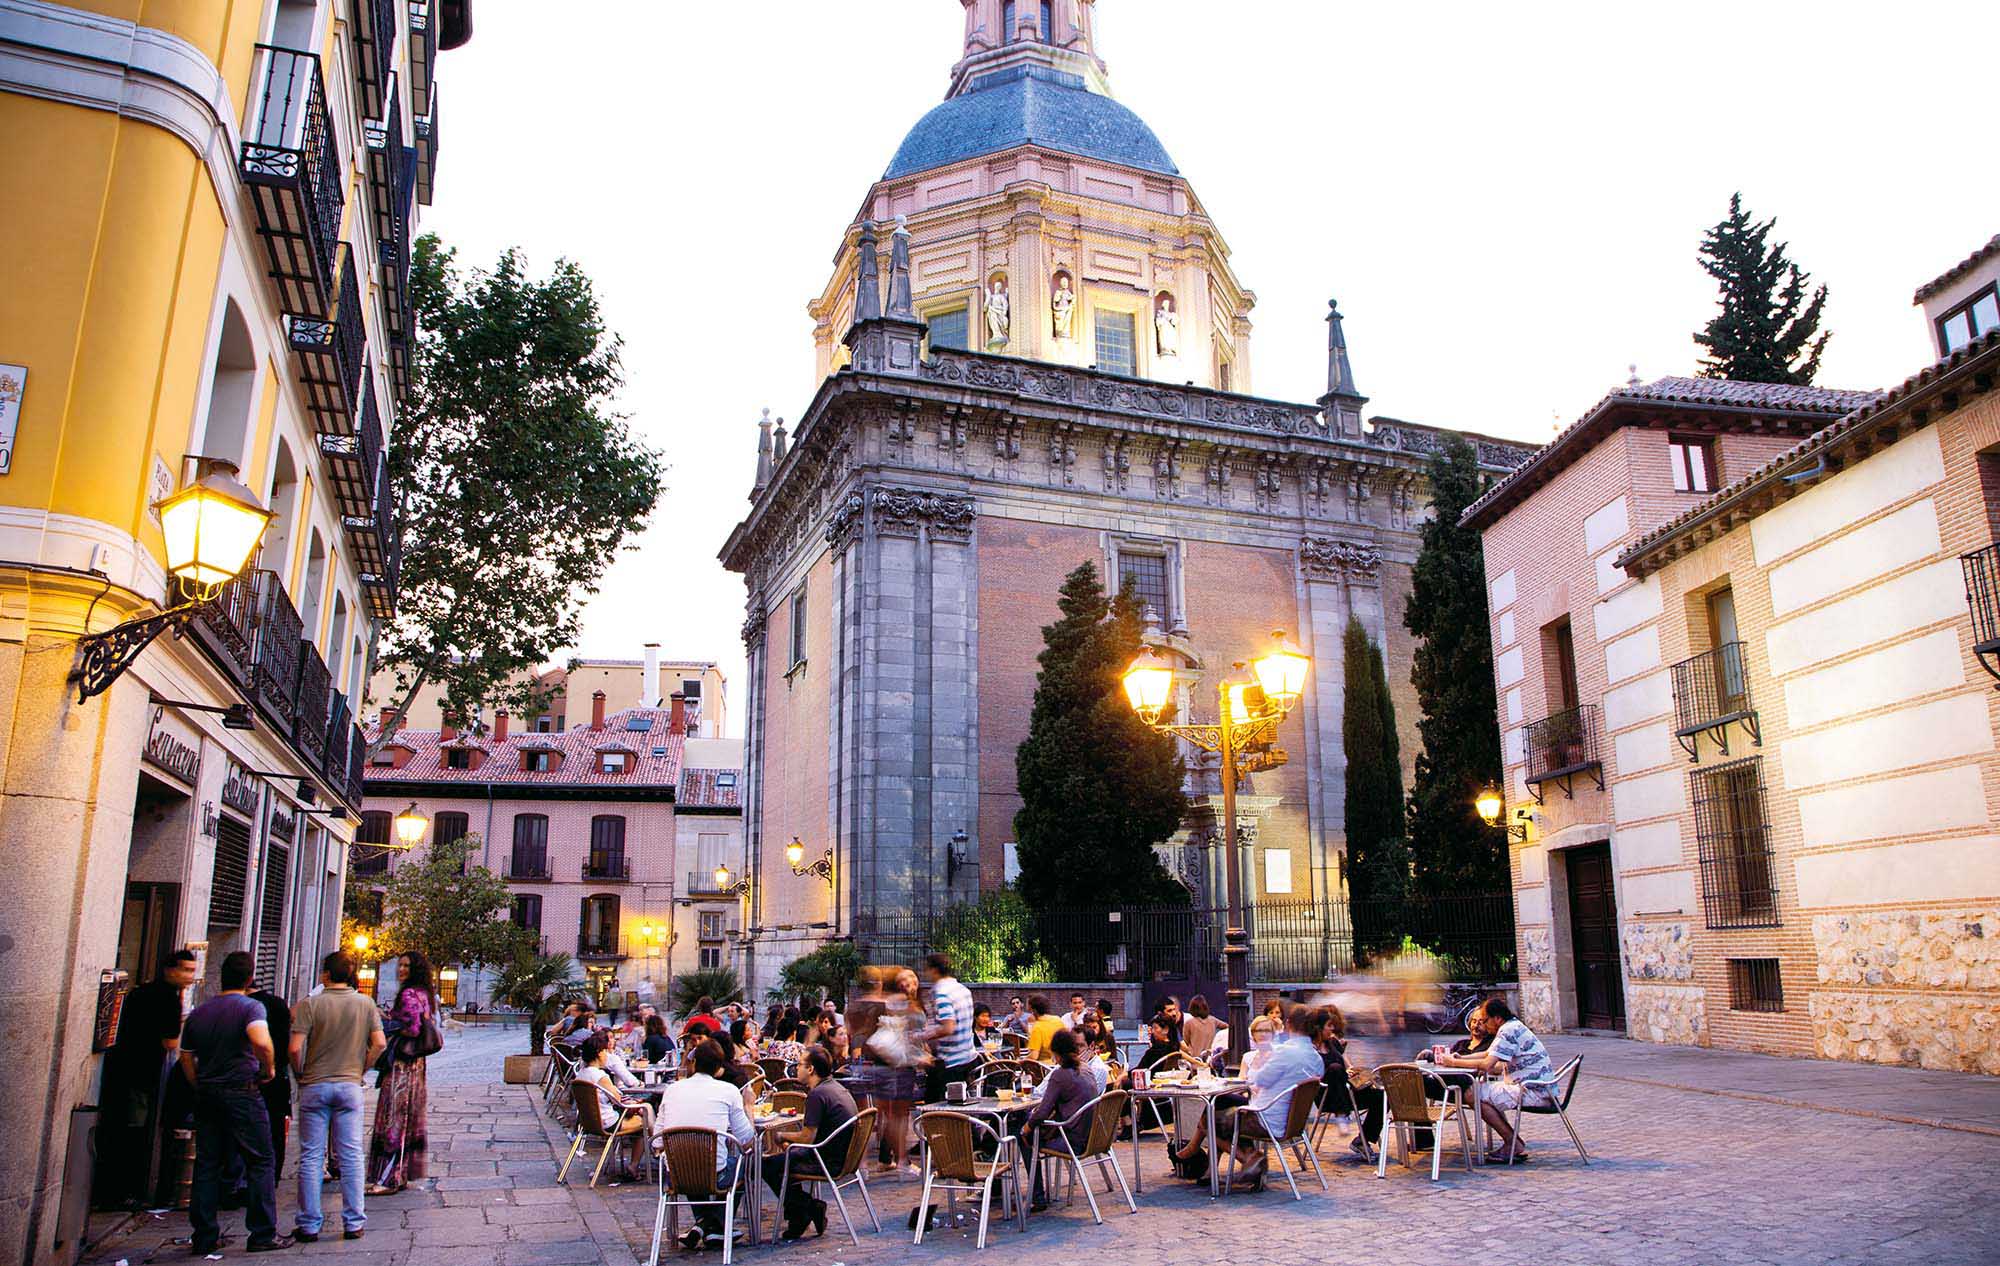 Europe, Spain, Madrid, Plaza San Andres, square, church, restaurant, guests sitting outside, evening, bar, gastronomy, architecture, locals, people